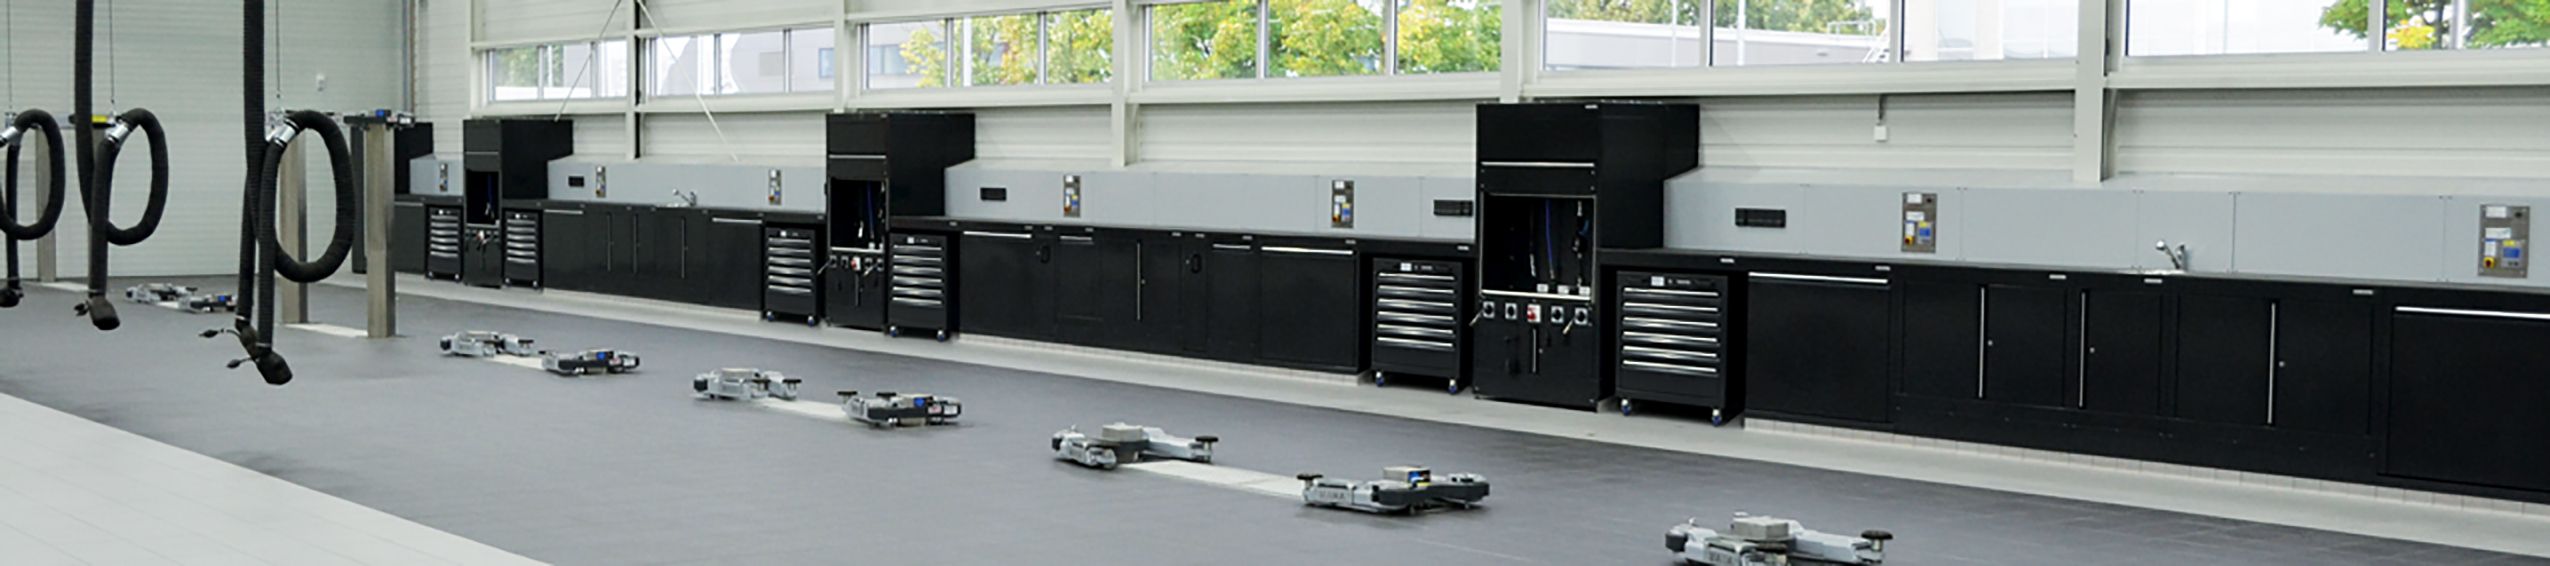 Black automotive tool cabinets in workshop by Dura Ltd